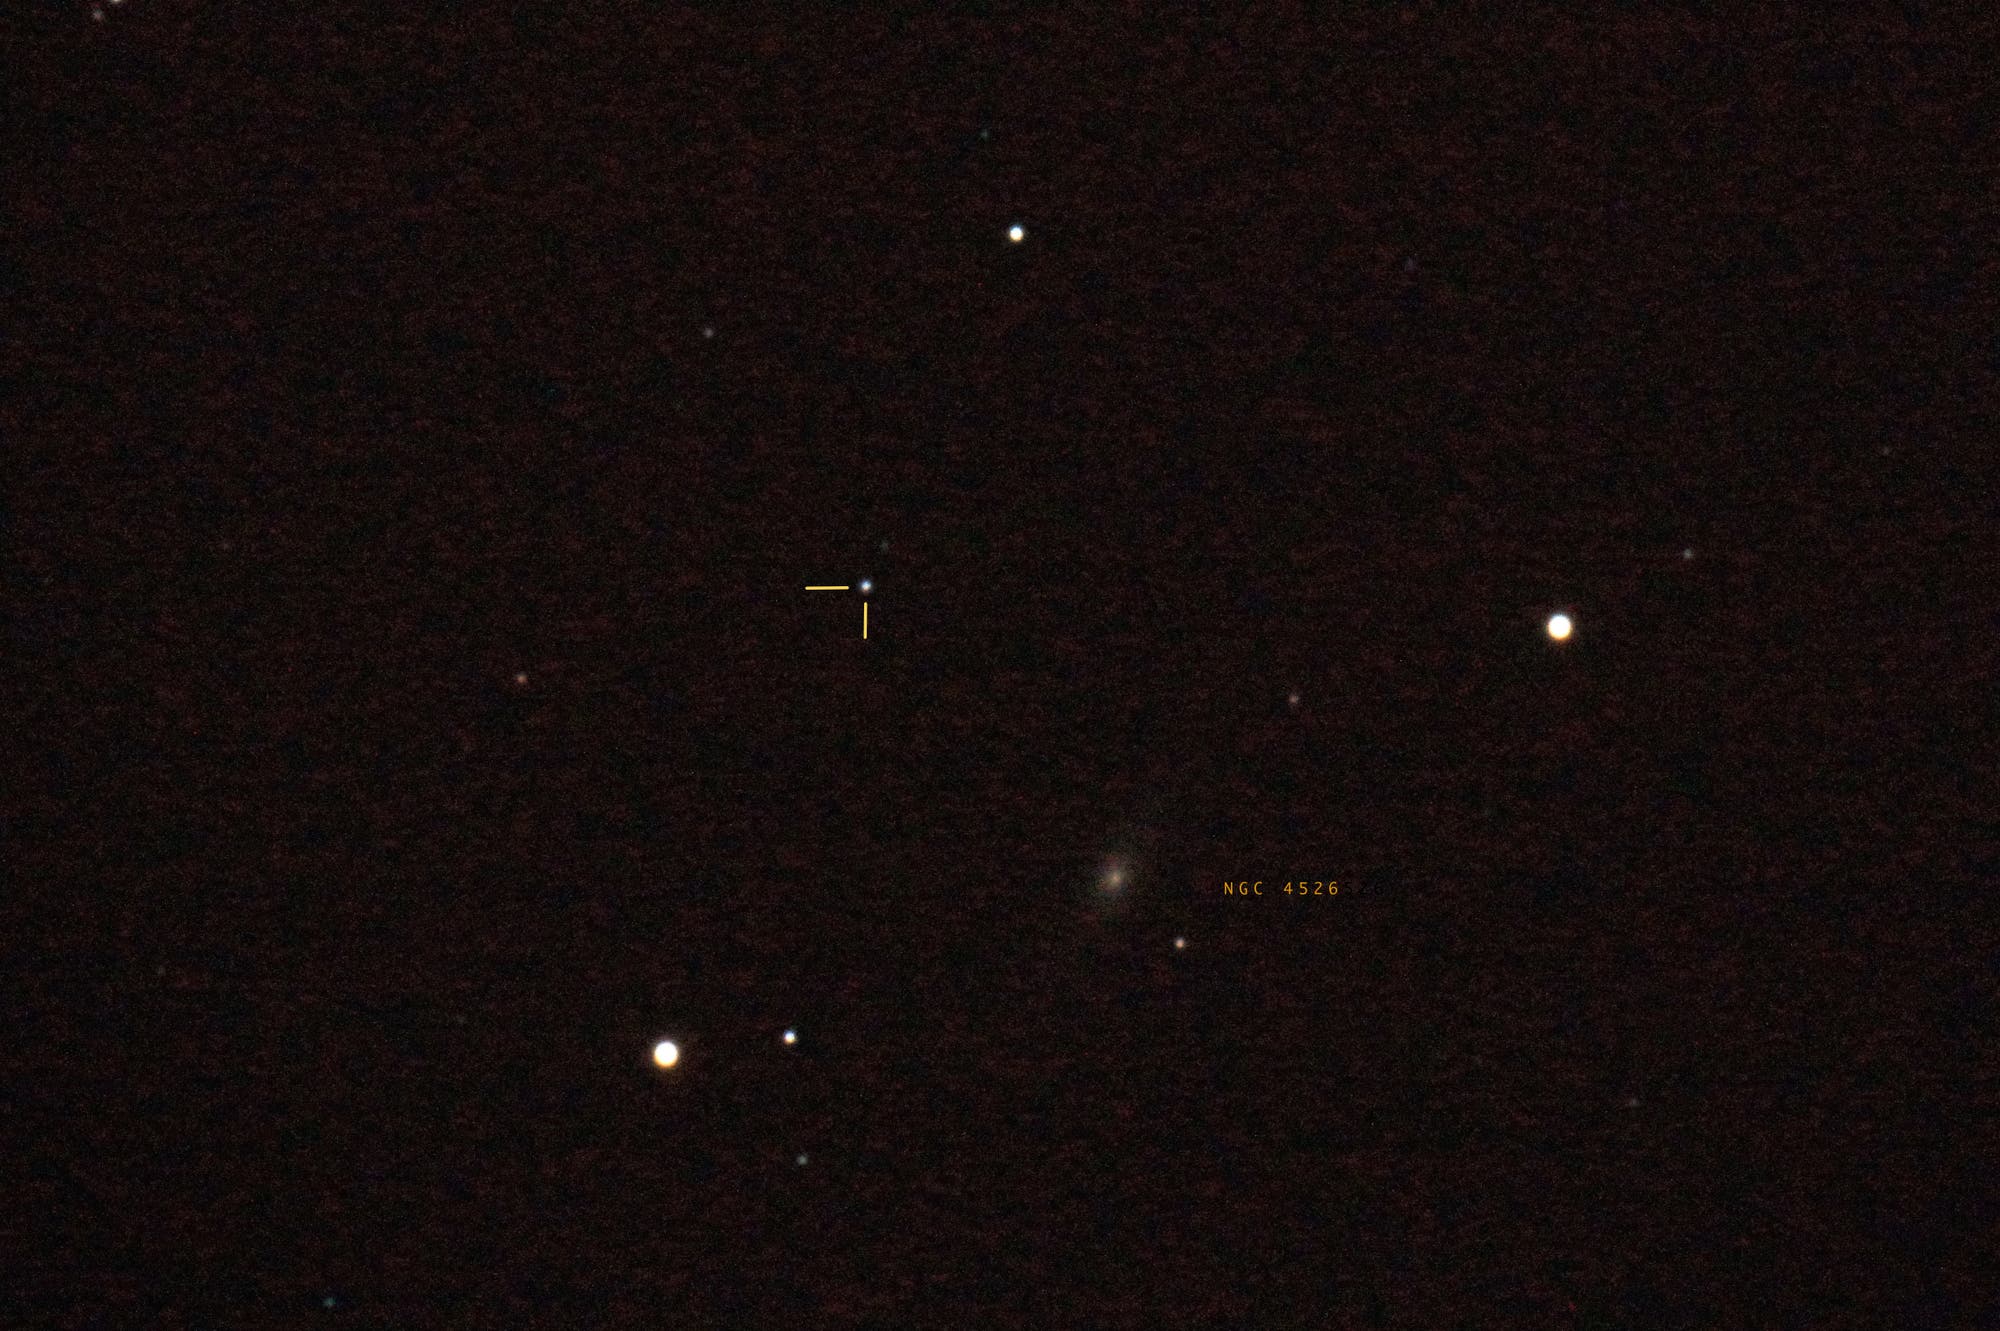 Asteroid (6) Hebe bei NGC 4526